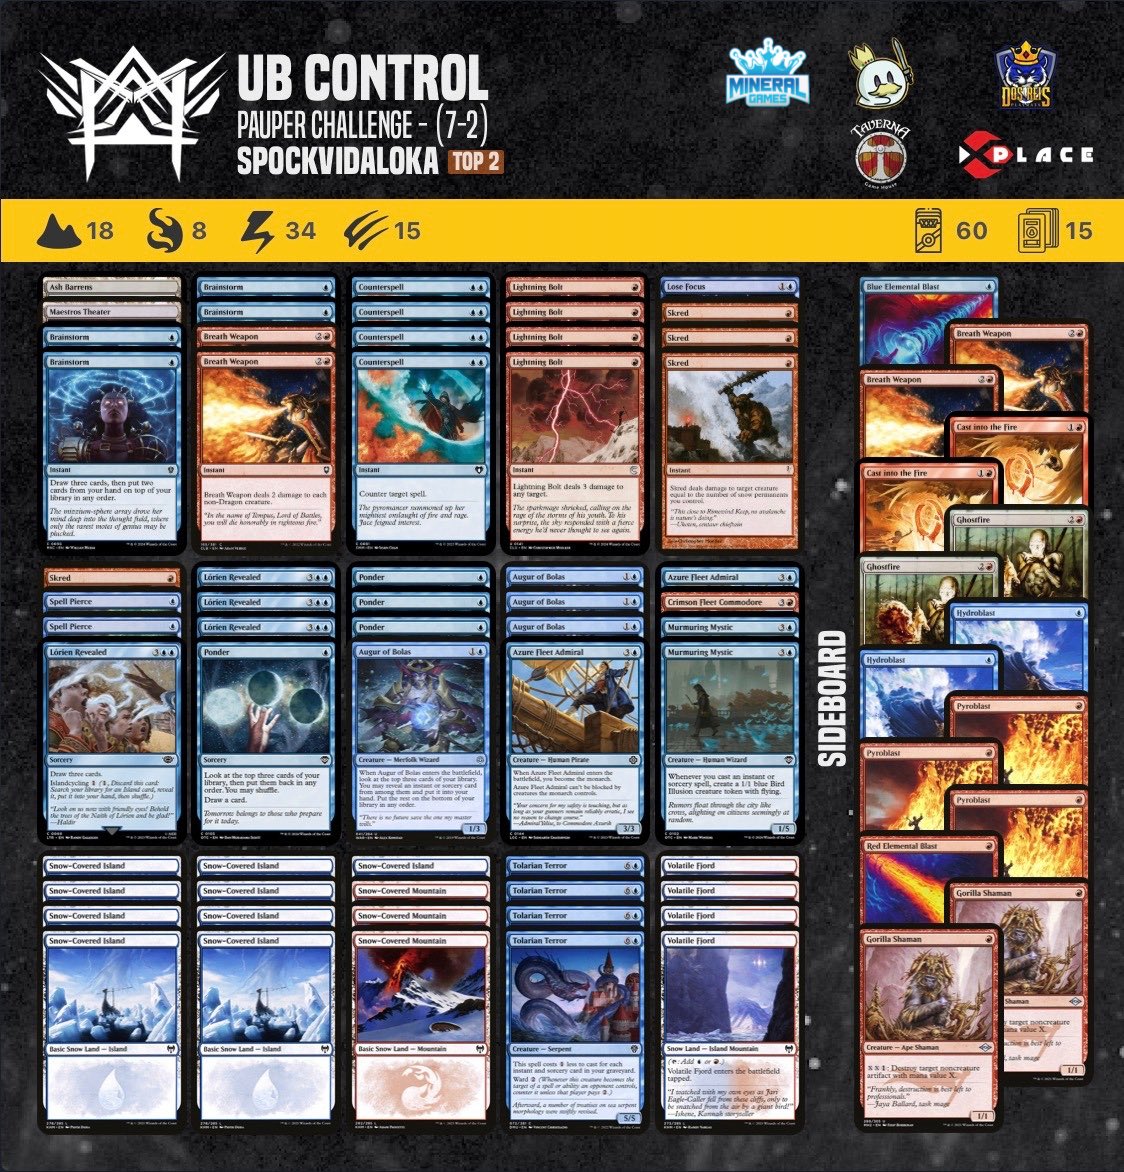 Our athlete @Vini_Spock achieved a 7-2 in the Pauper Challenge tournament with this UB Control decklist.

#pauper  #magic #mtgcommon #metagamepauper #mtgpauper #magicthegathering #wizardsofthecoast 

@PauperDecklists @fireshoes